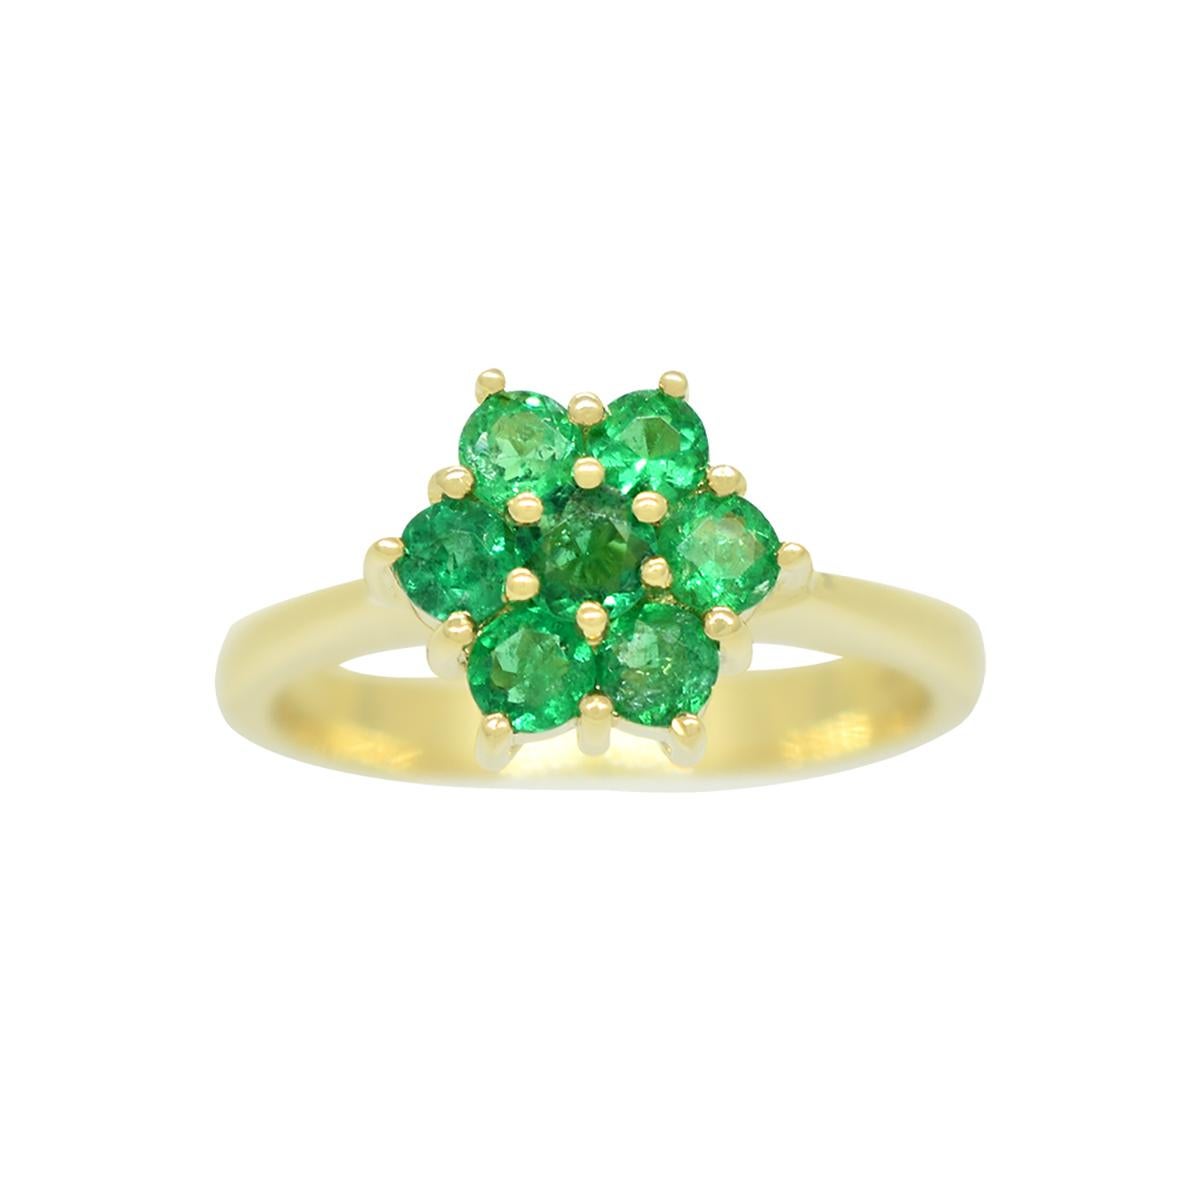 Natural Colombian Emeralds in Cluster Fashion Gold Ring May Birthstone Jewelry (Viktorianisch) im Angebot